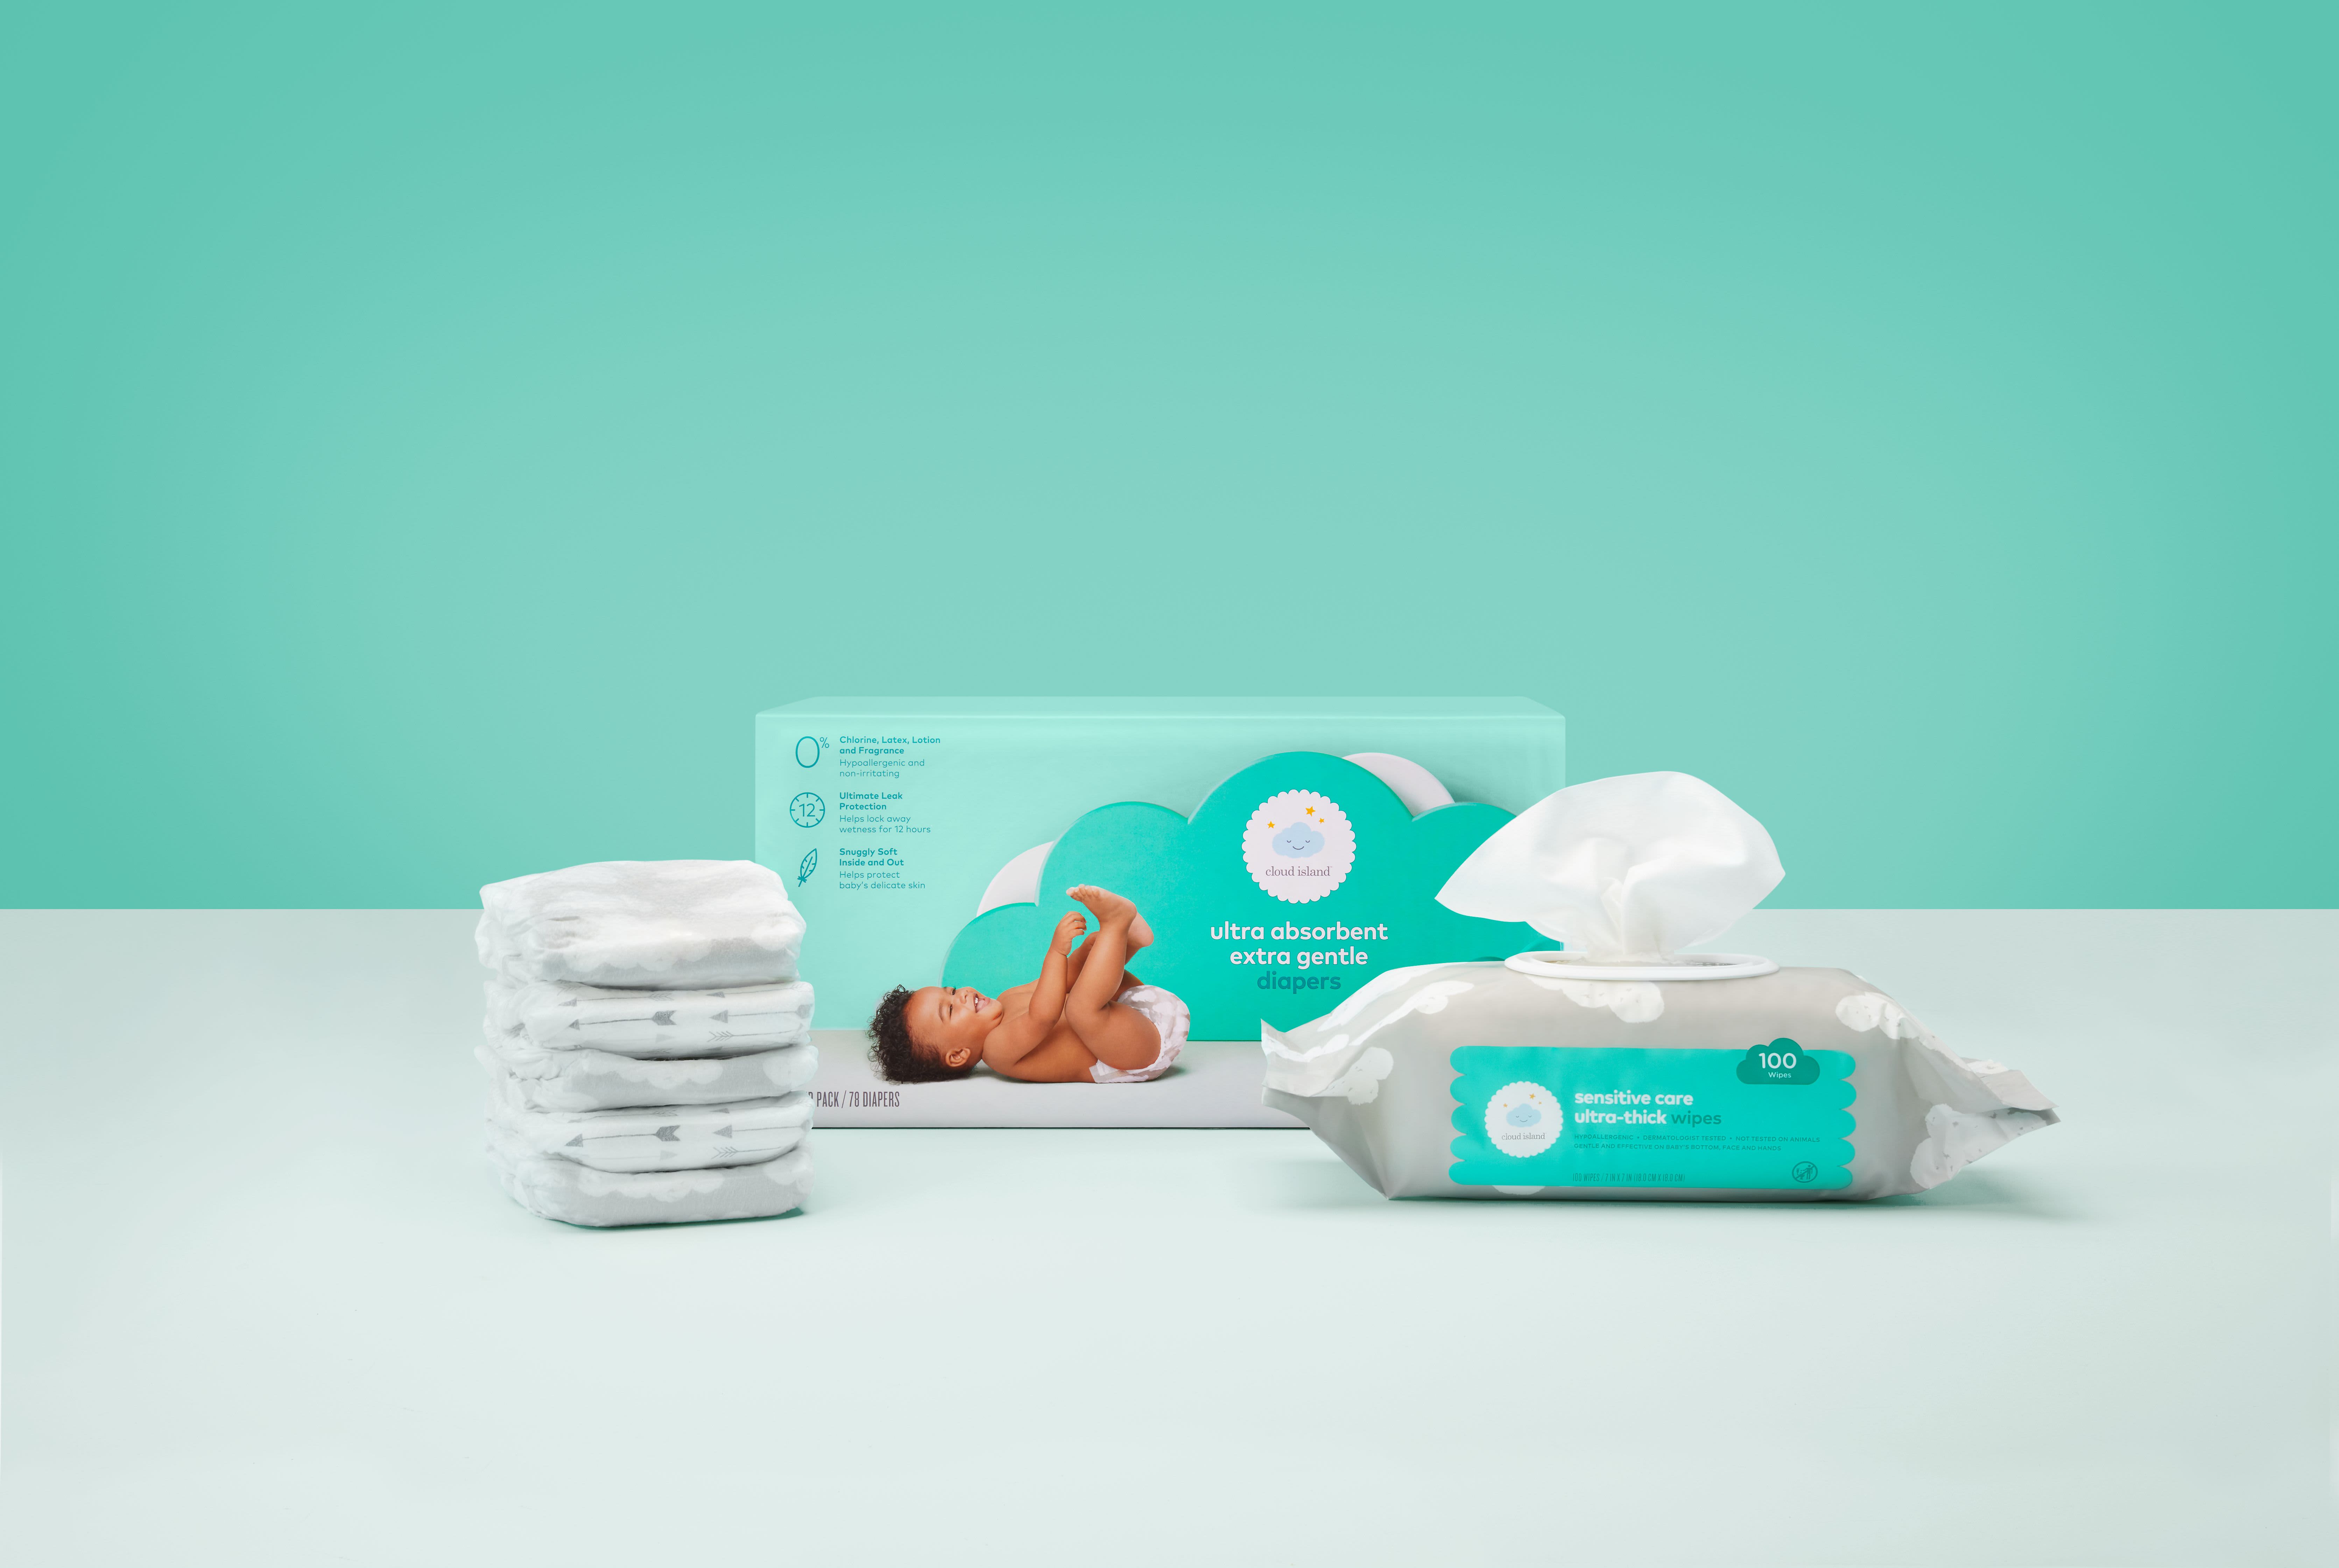 target pampers baby wipes